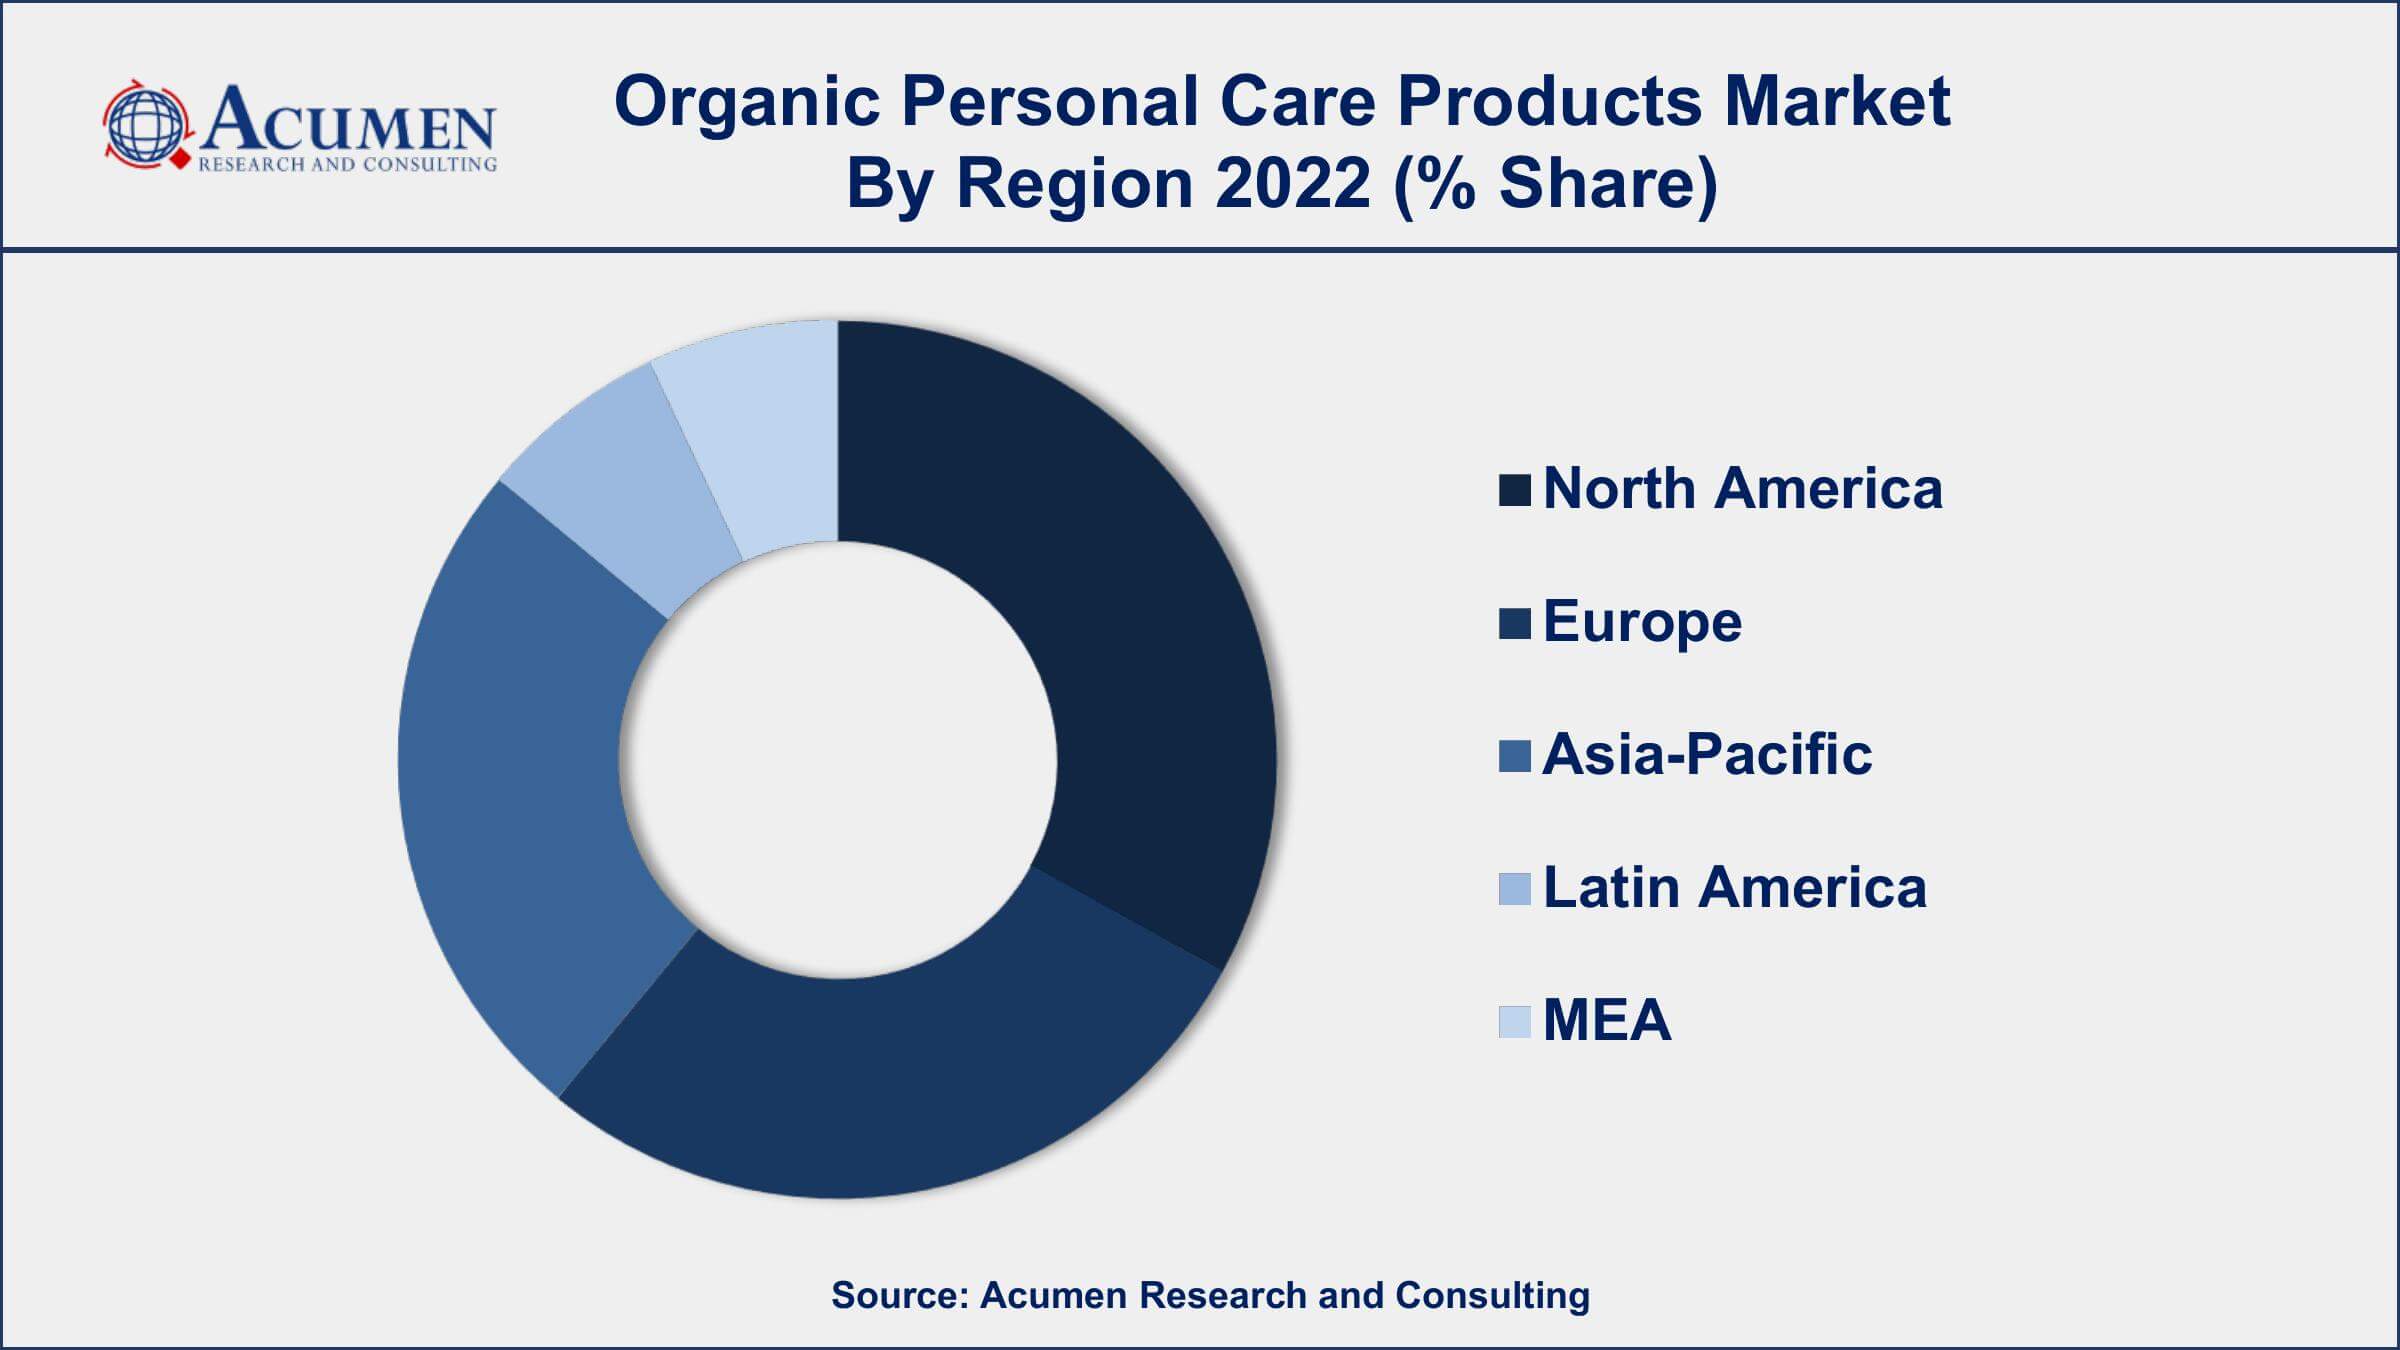 Organic Personal Care Products Market Drivers